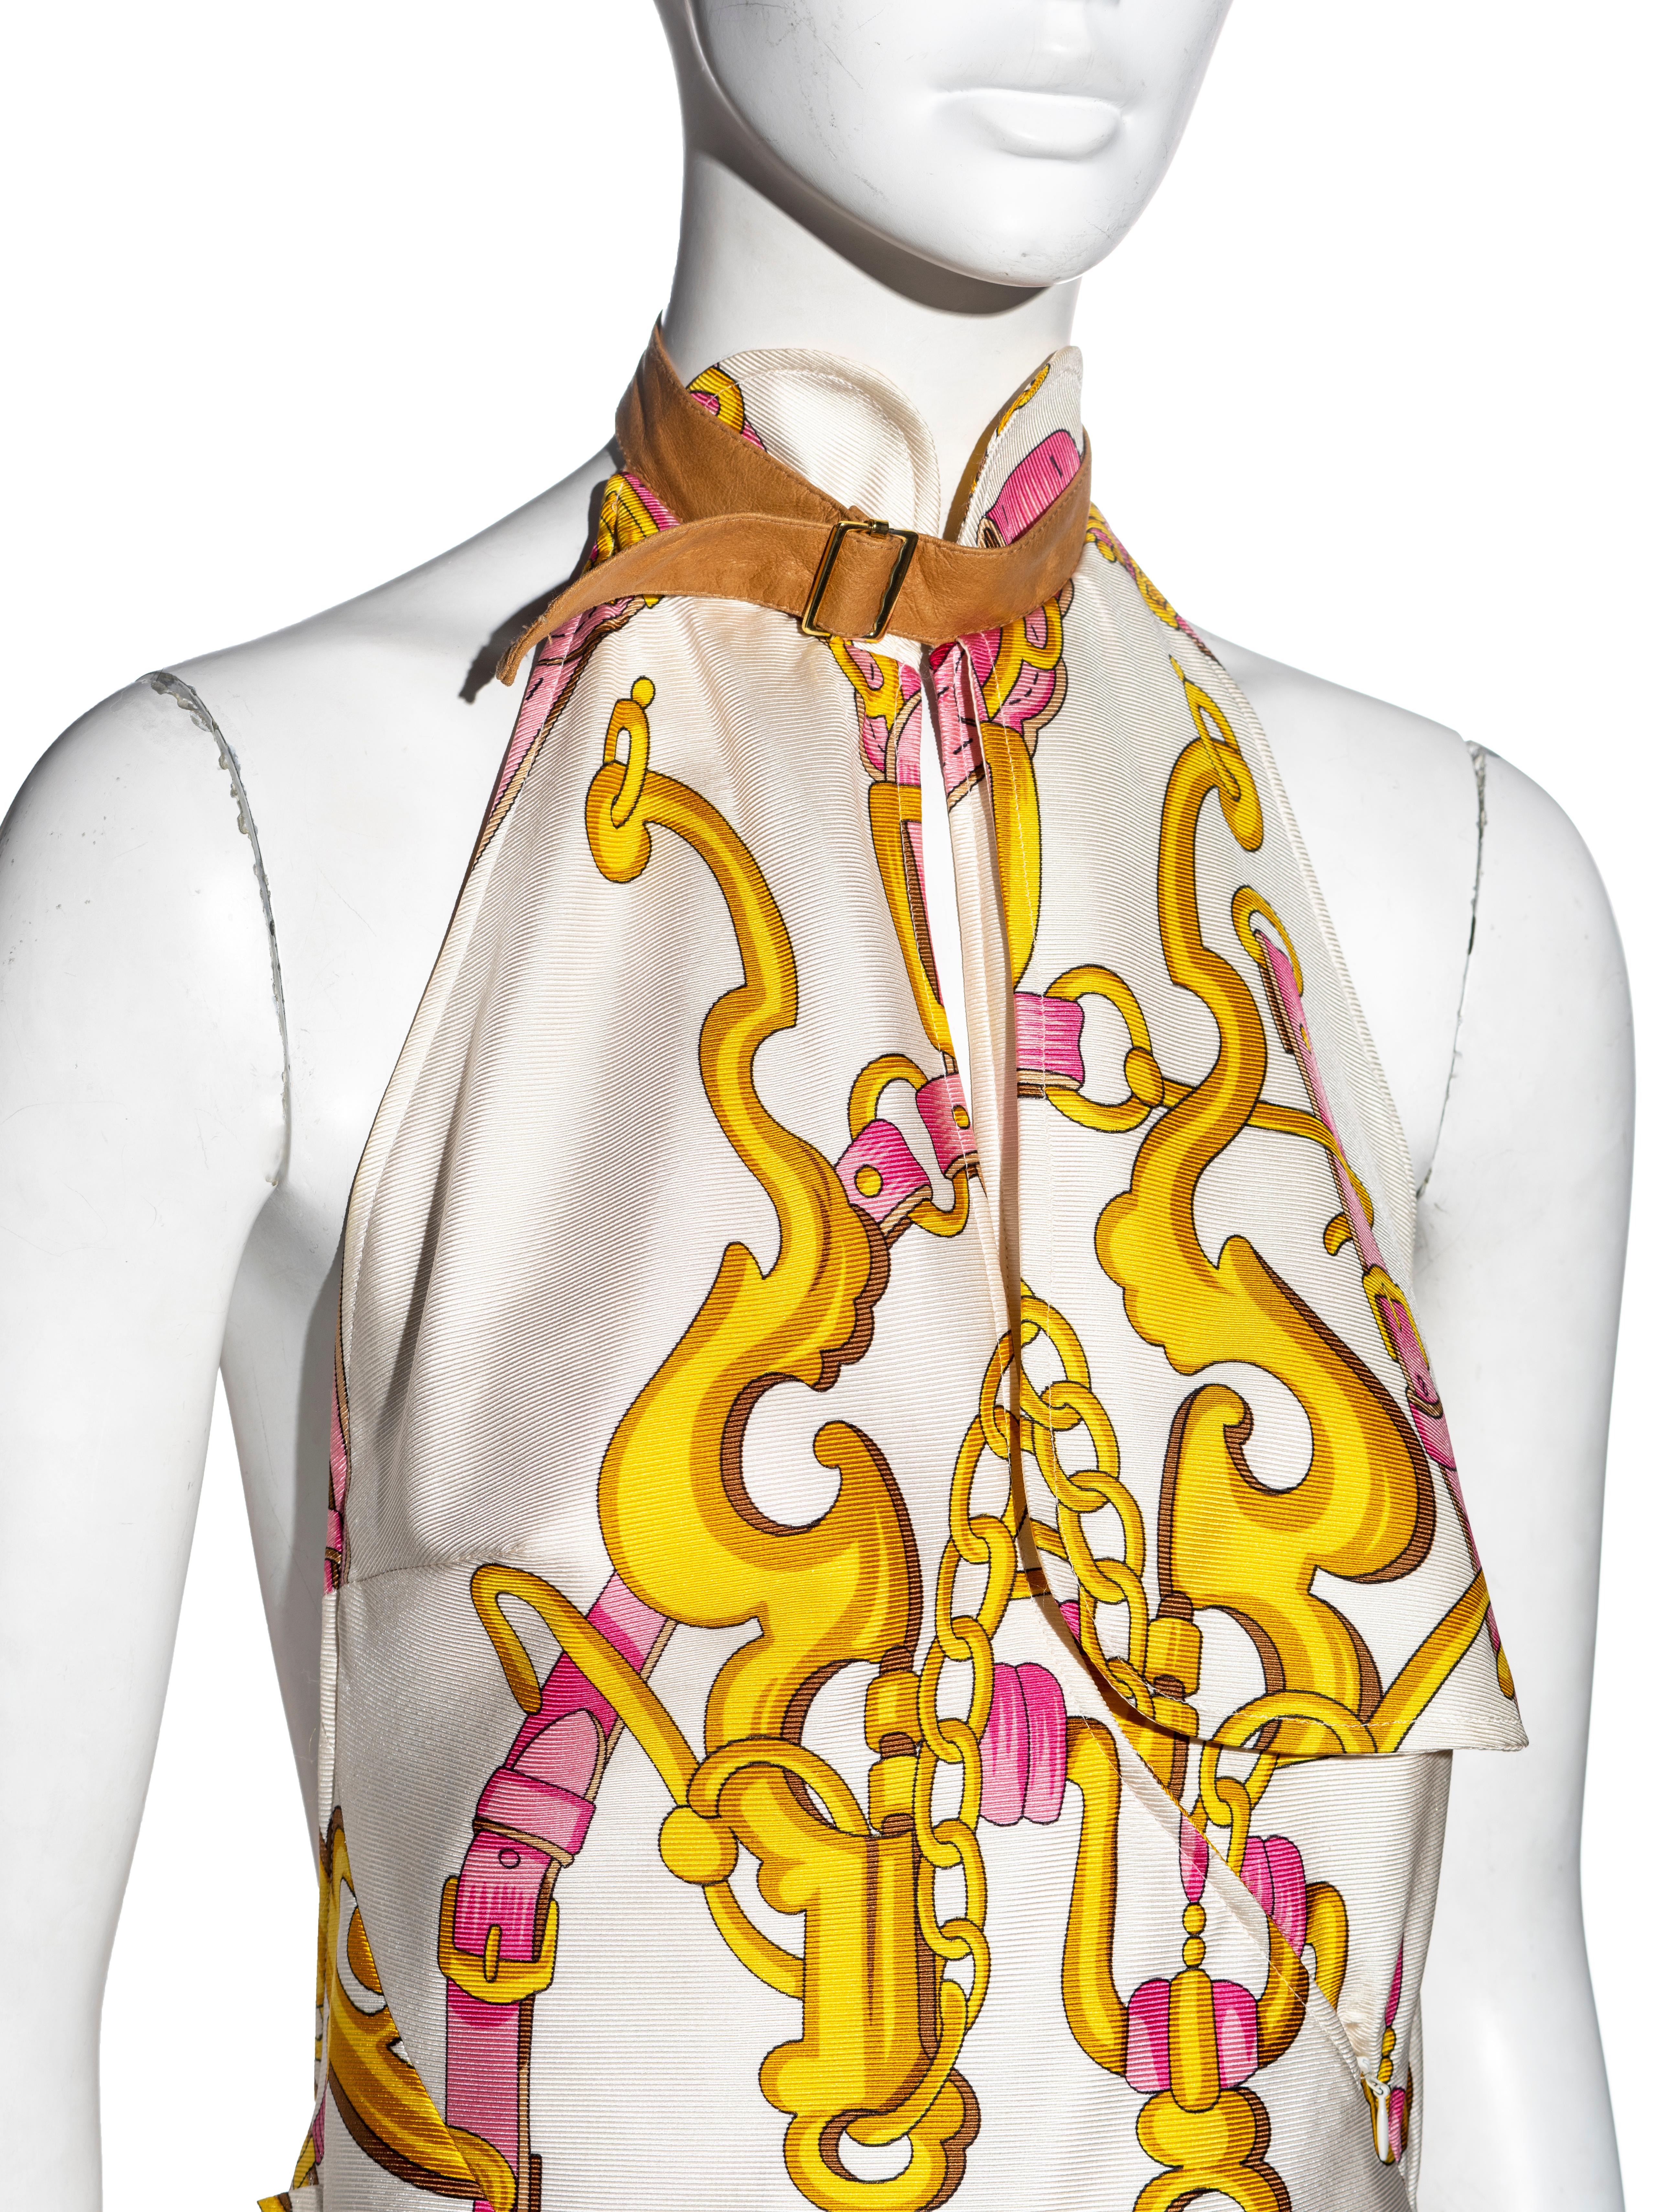 Christian Dior by John Galliano equestrian printed silk scarf dress, ss 2000 In Excellent Condition For Sale In London, GB